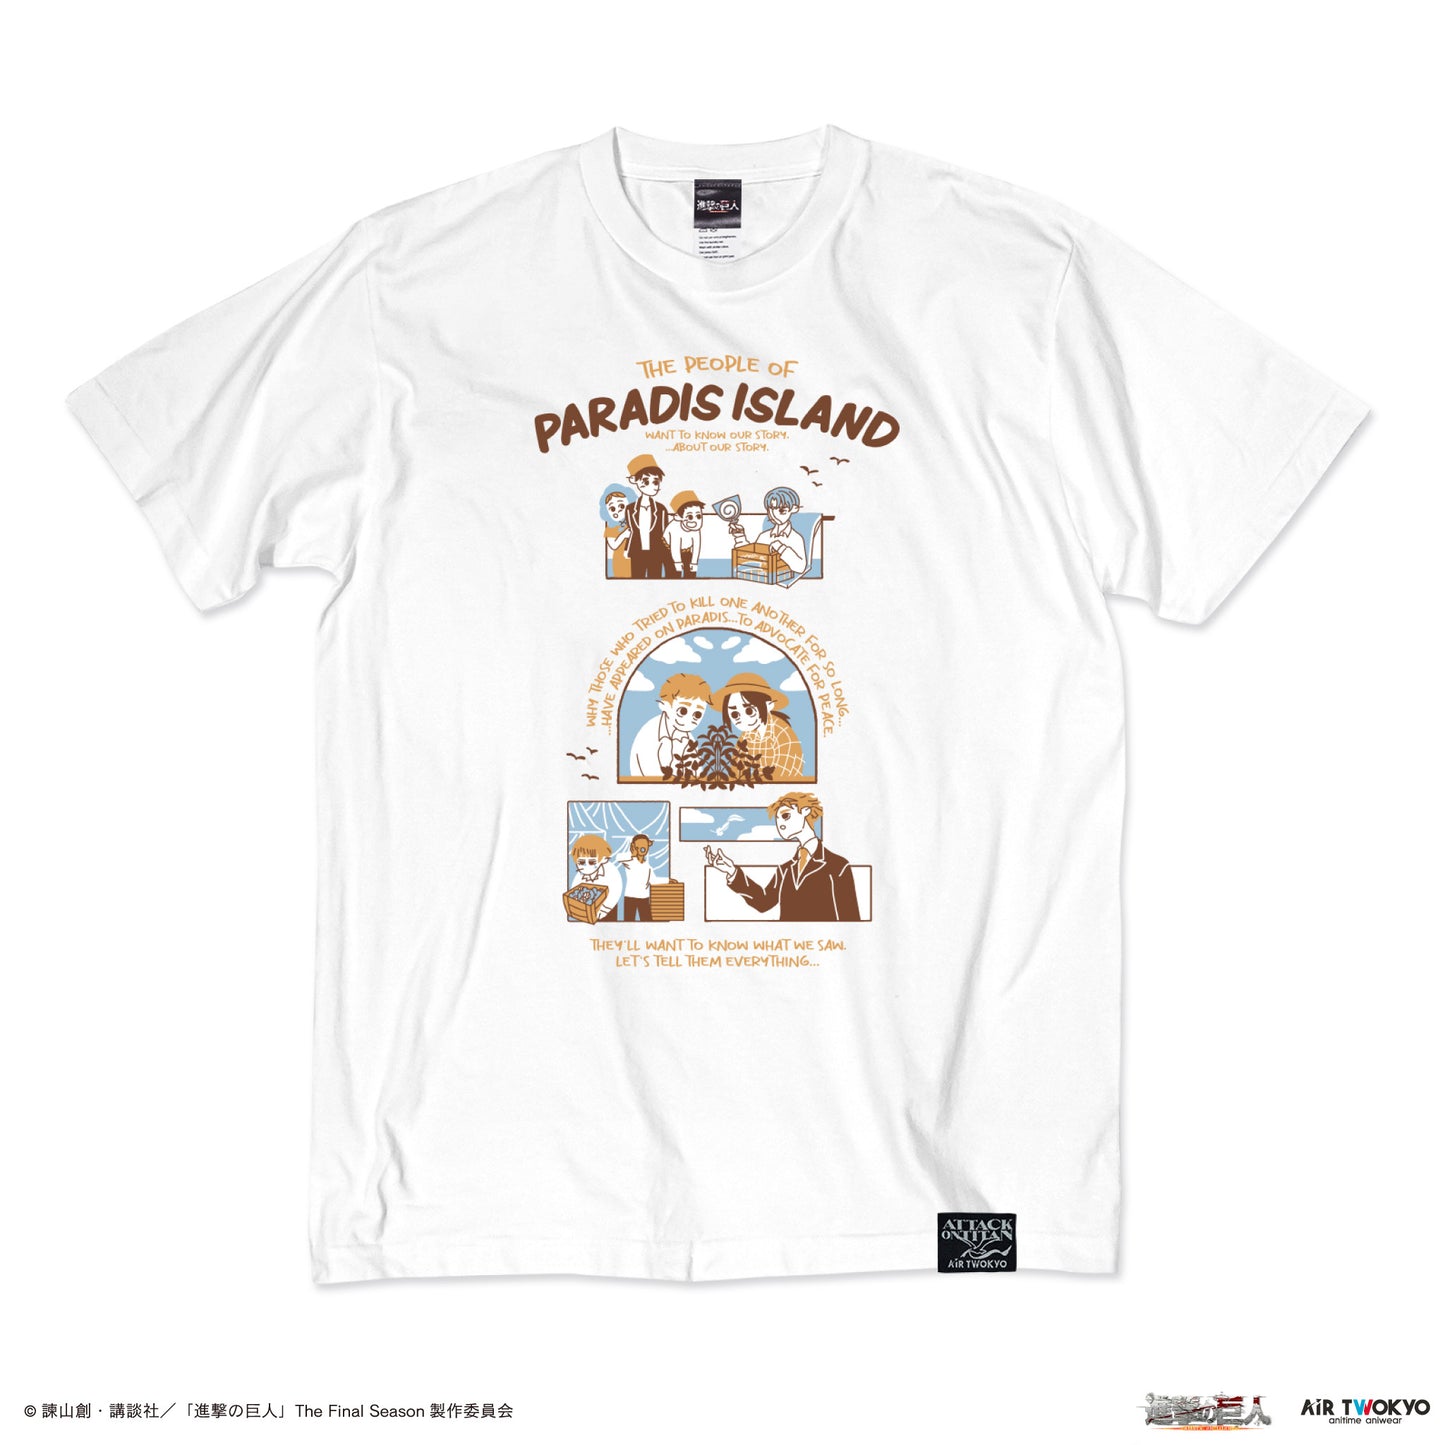 “Attack on Titan” The Final Season THE FINAL CHAPTERS Illustration T-shirt 4 (They'll want to know what we saw.)